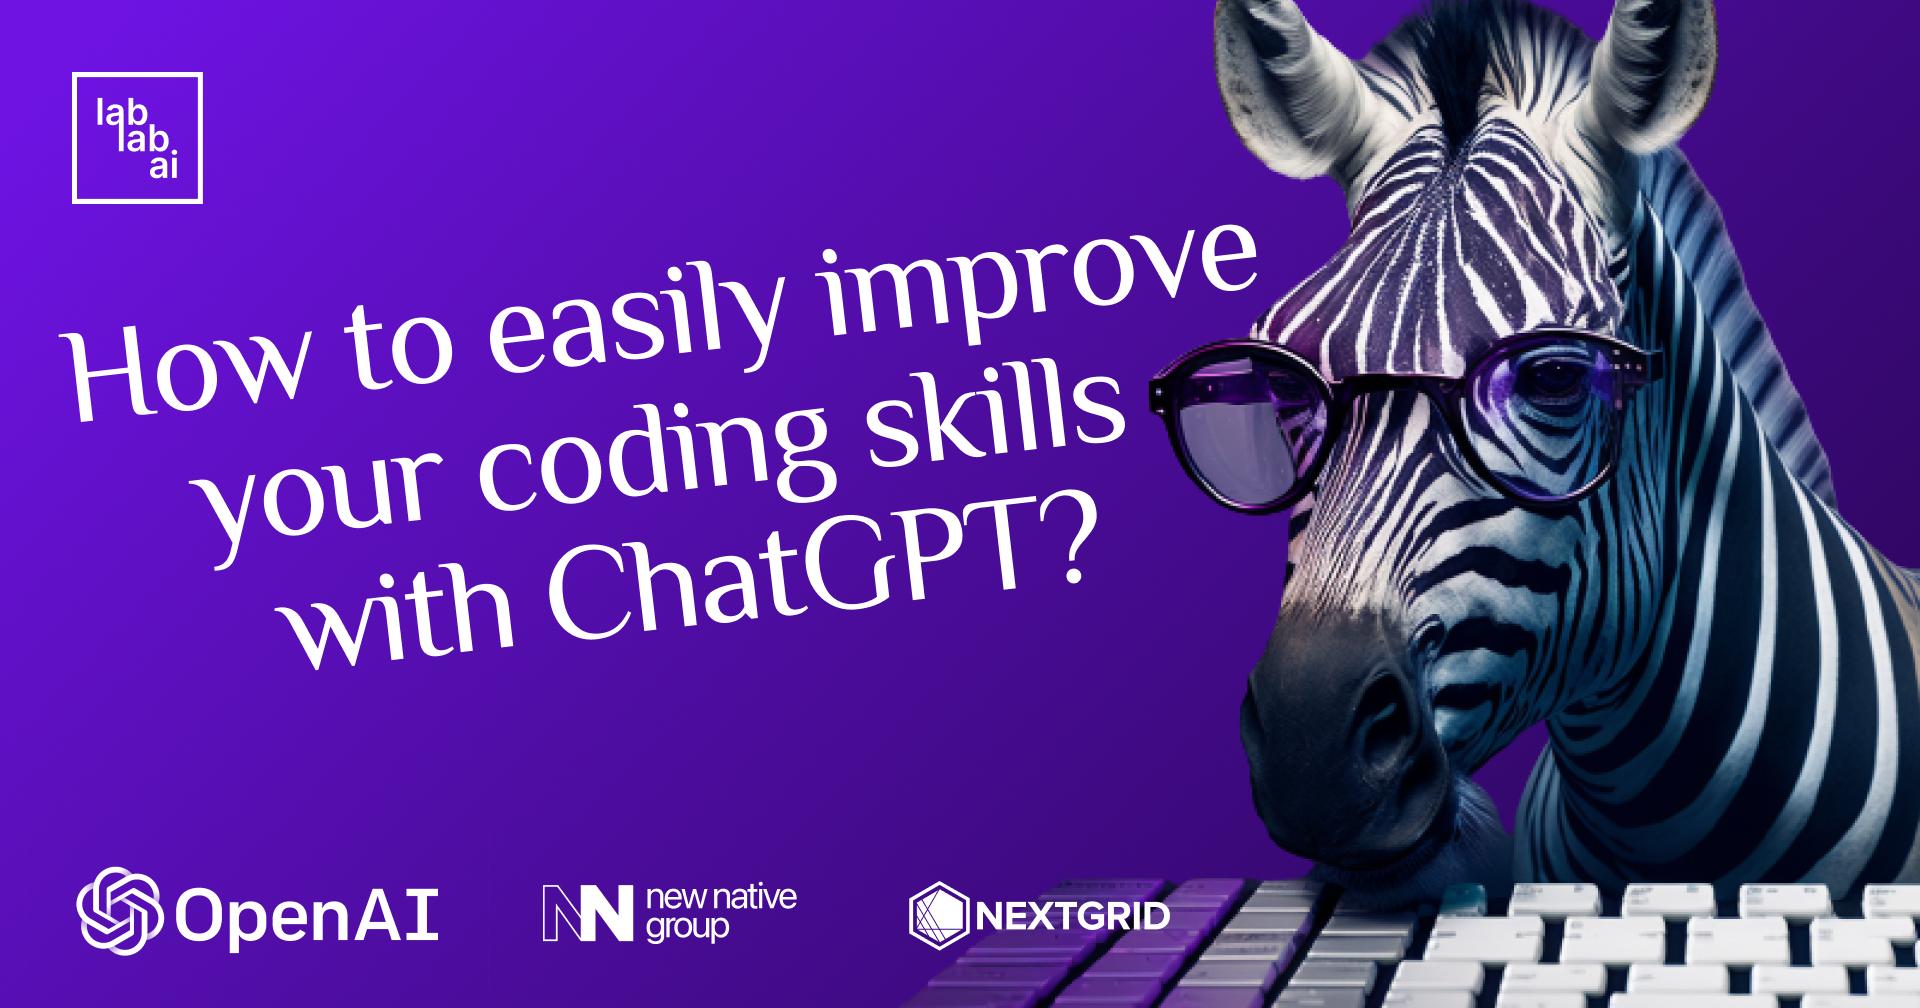 ChatGPT tutorial: How to easily improve your coding skills with ChatGPT